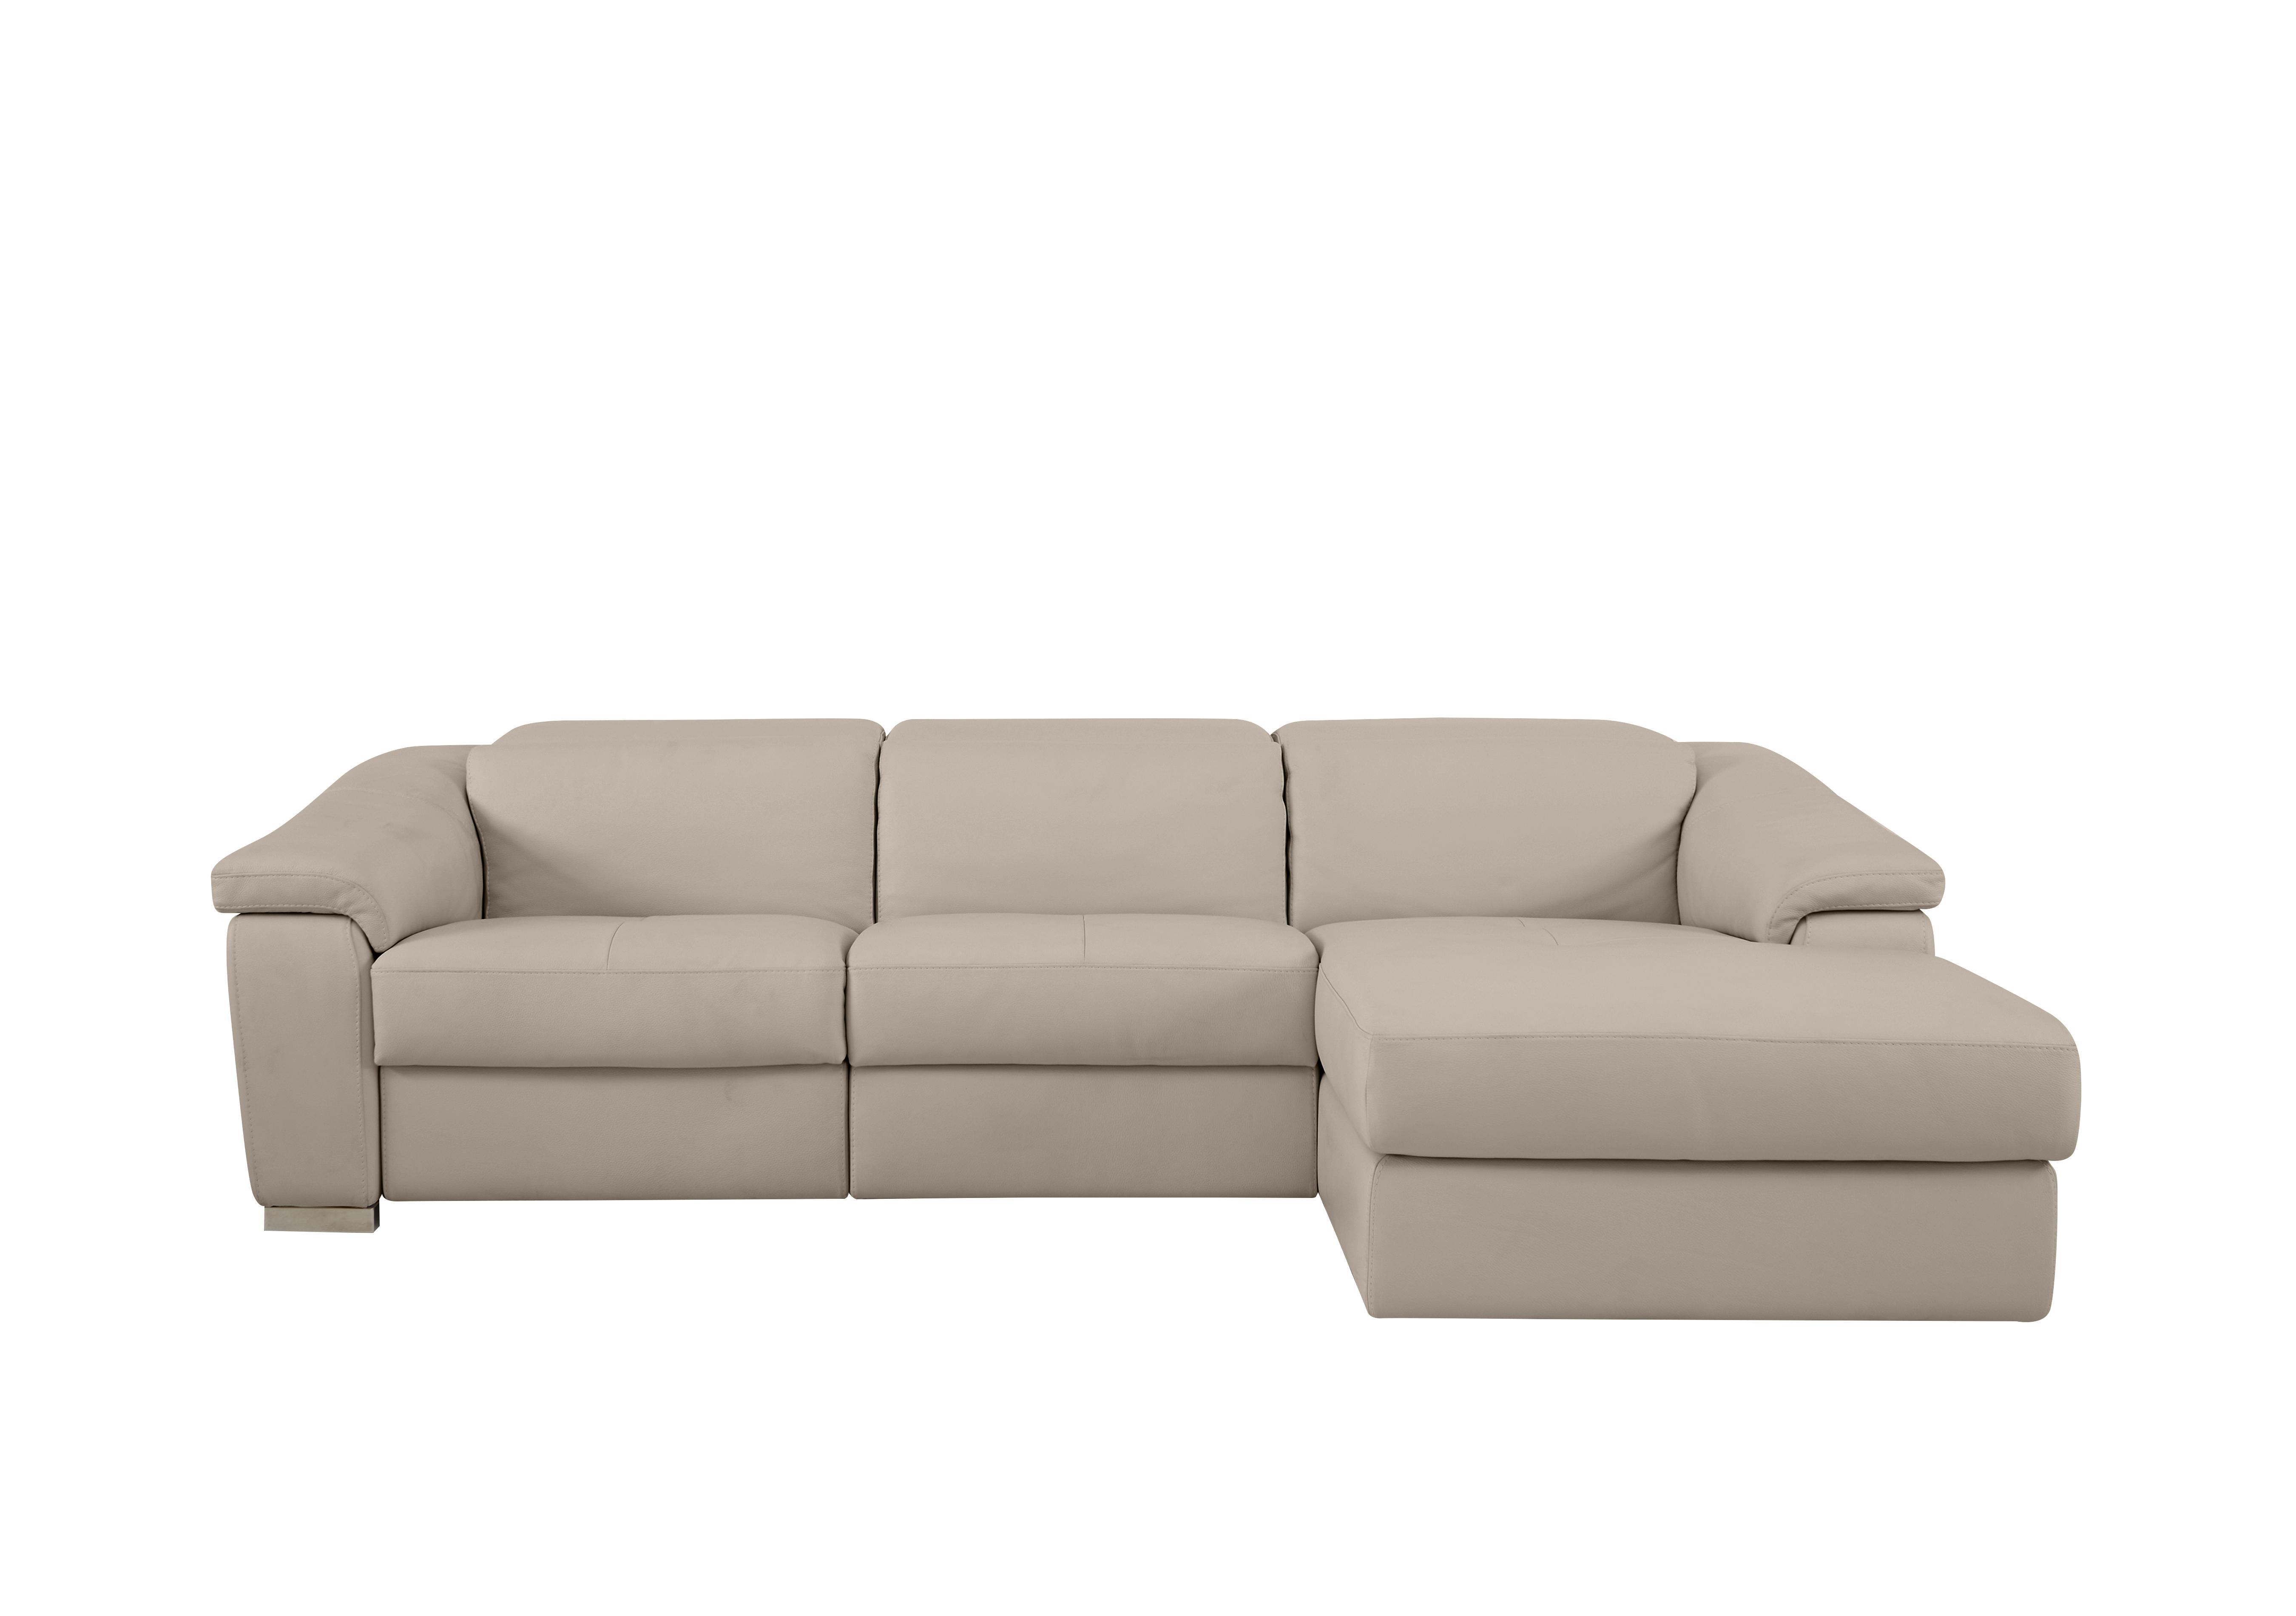 Galileo Leather Chaise End Sofa in Botero Crema 2156 Ch on Furniture Village